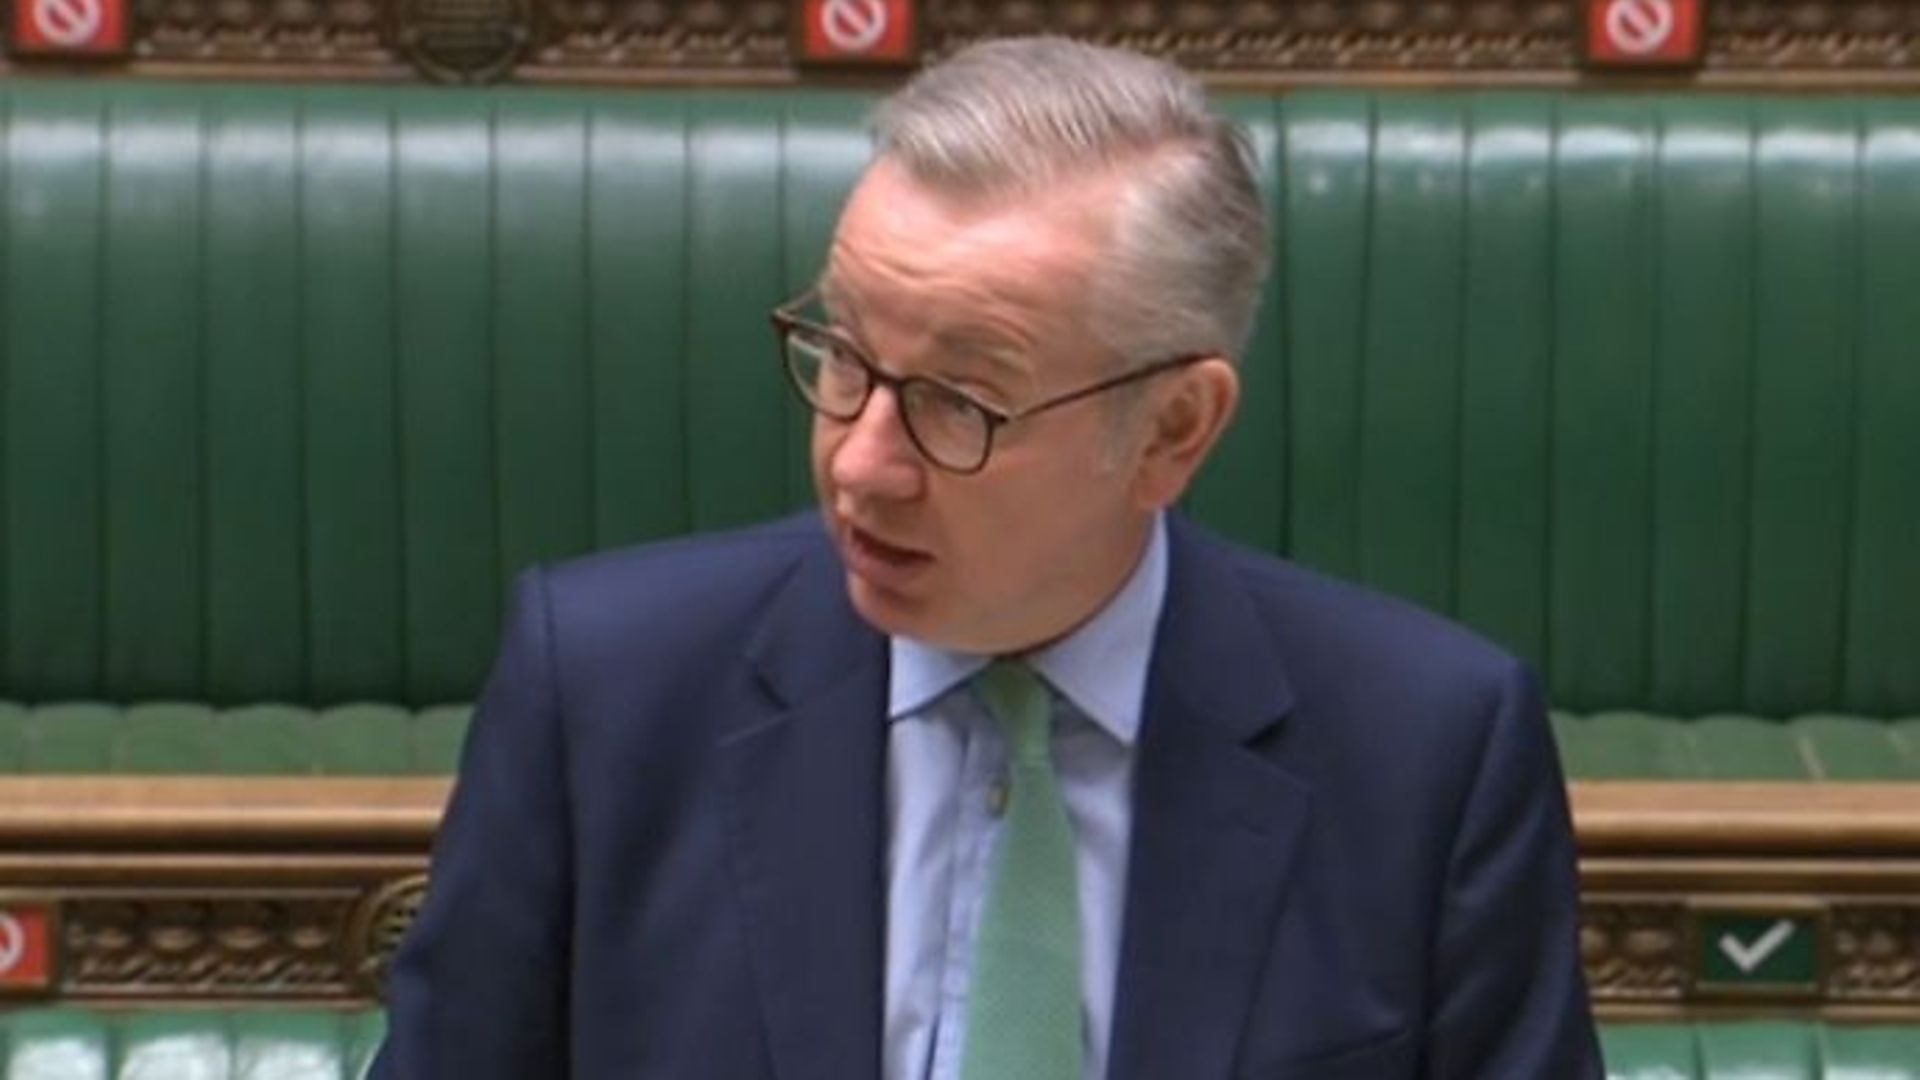 Cabinet minister Michael Gove speaking in the House of Commons.